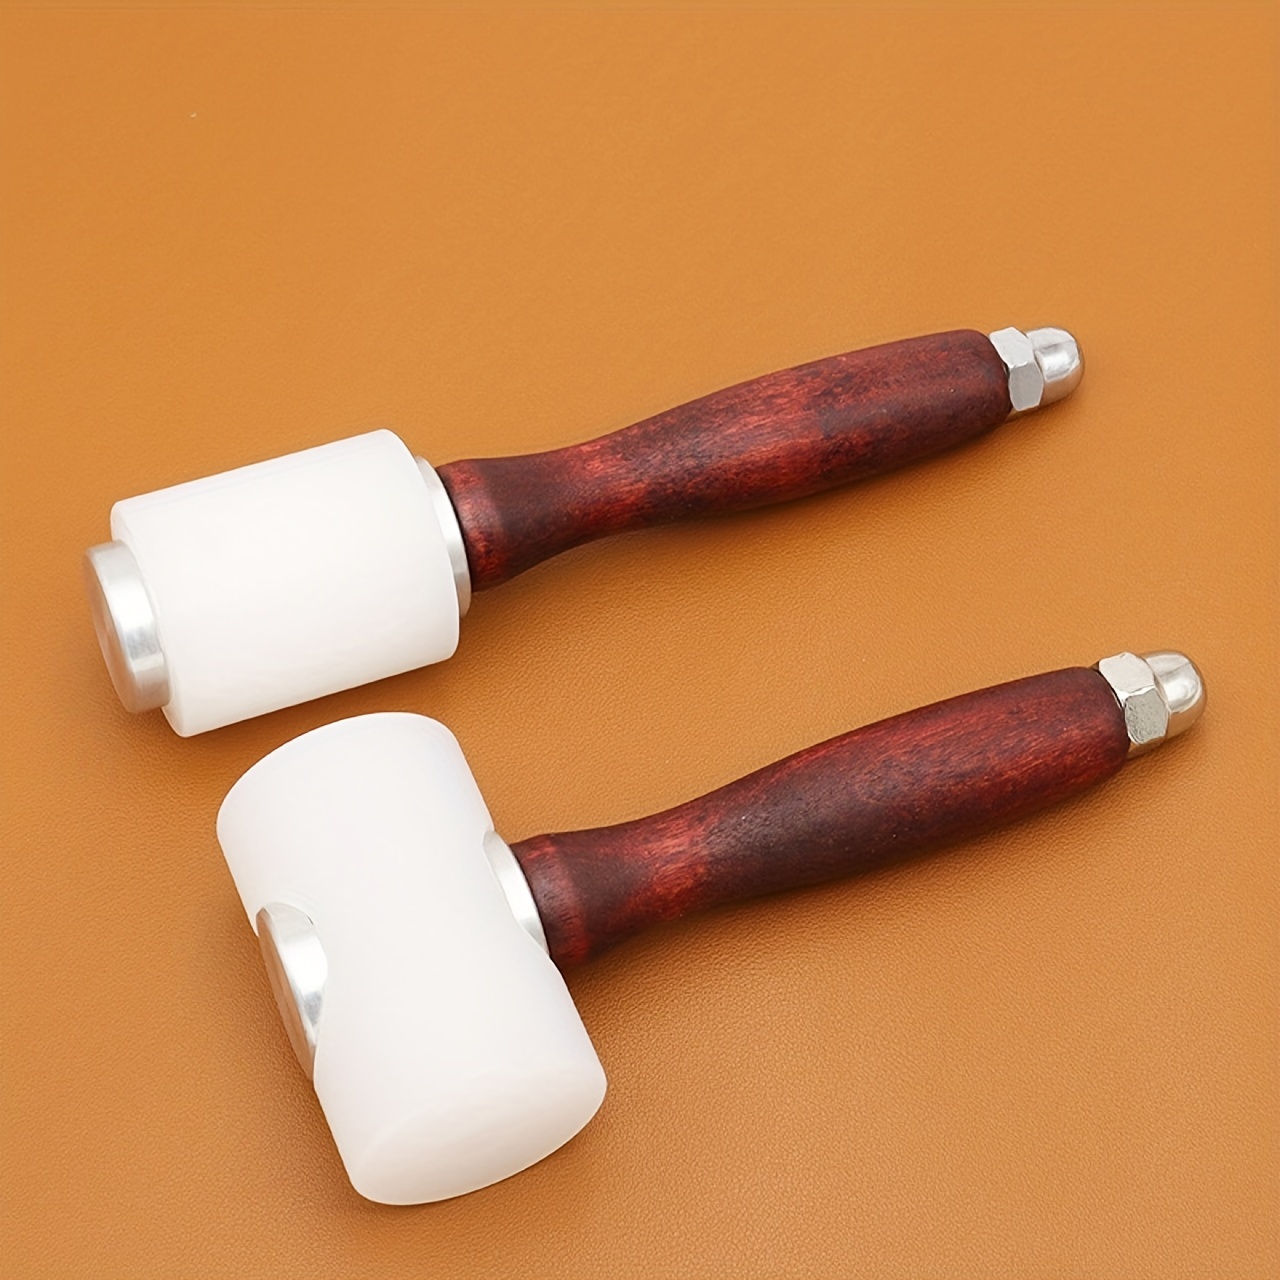 2 Pcs Leather Carving Hammer,Leather Mallet,Wooden Handle Nylon Hammer,Leather Tools for Handmade DIY Leather Work, Brown